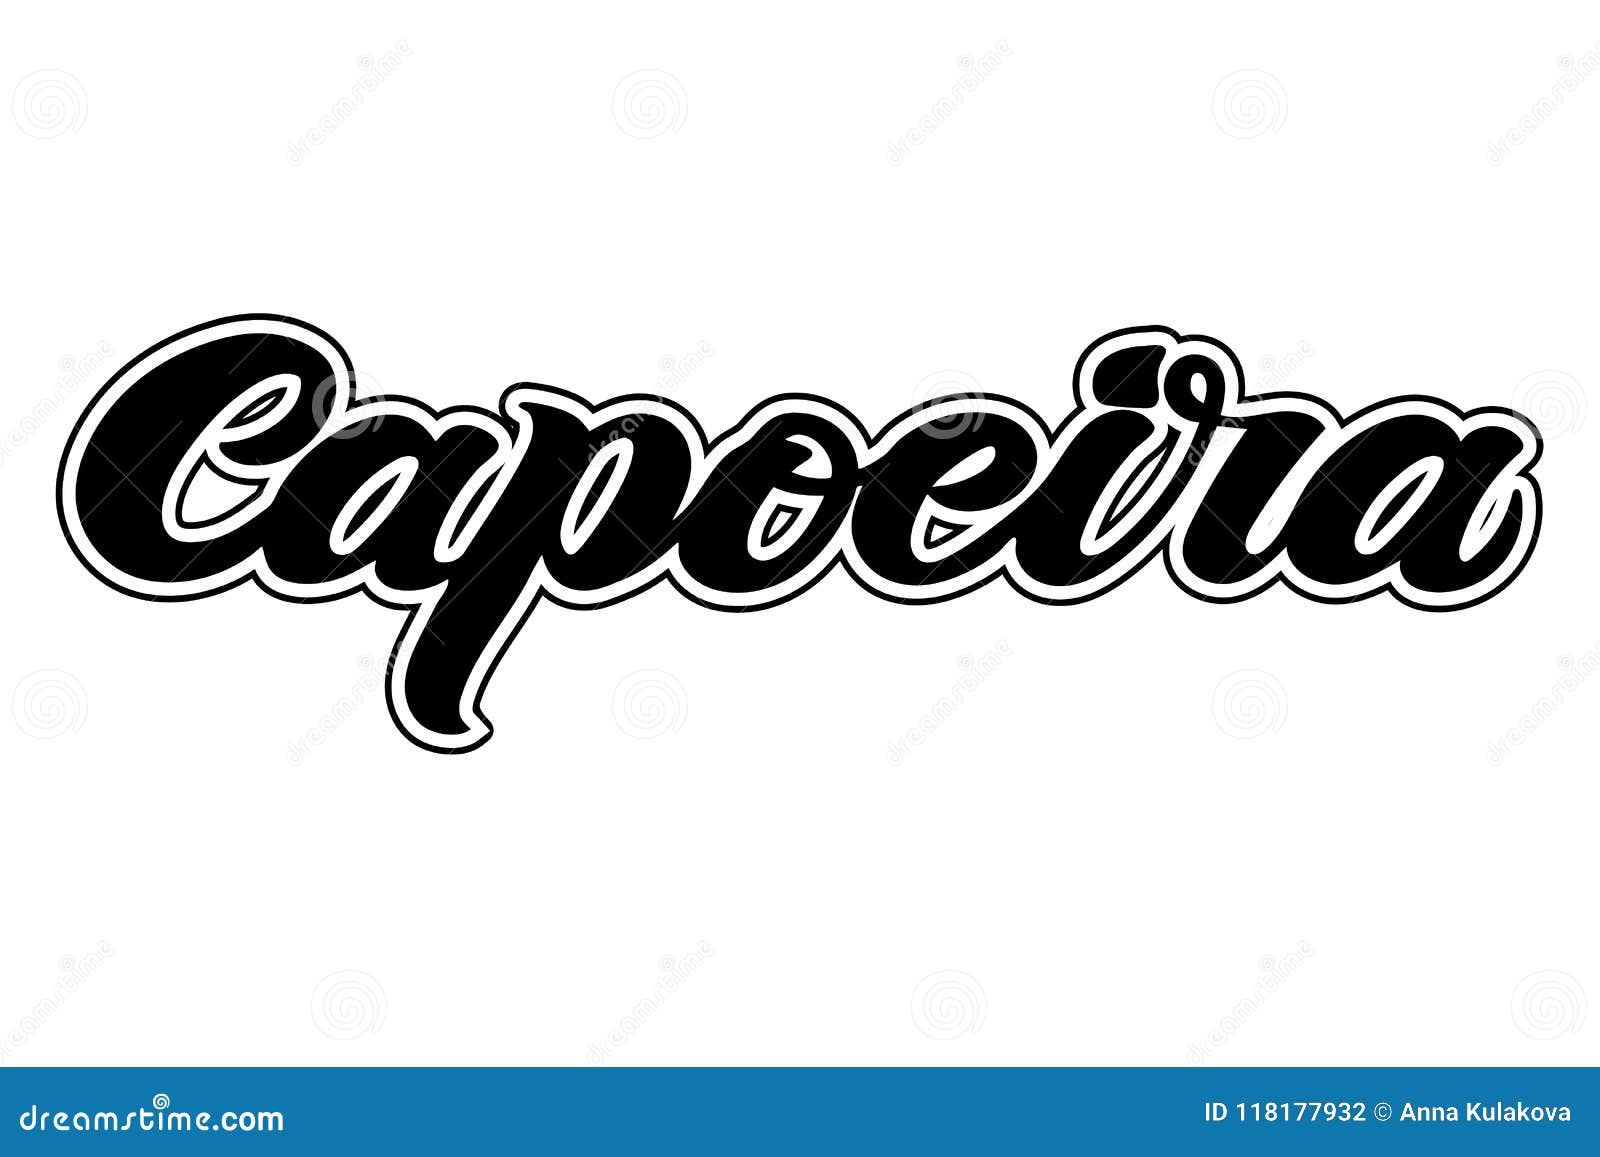 capoeira lettering and sillouettes of capoeirists, no background. for ing capoeira promo, logo, banner, poster, website, inv